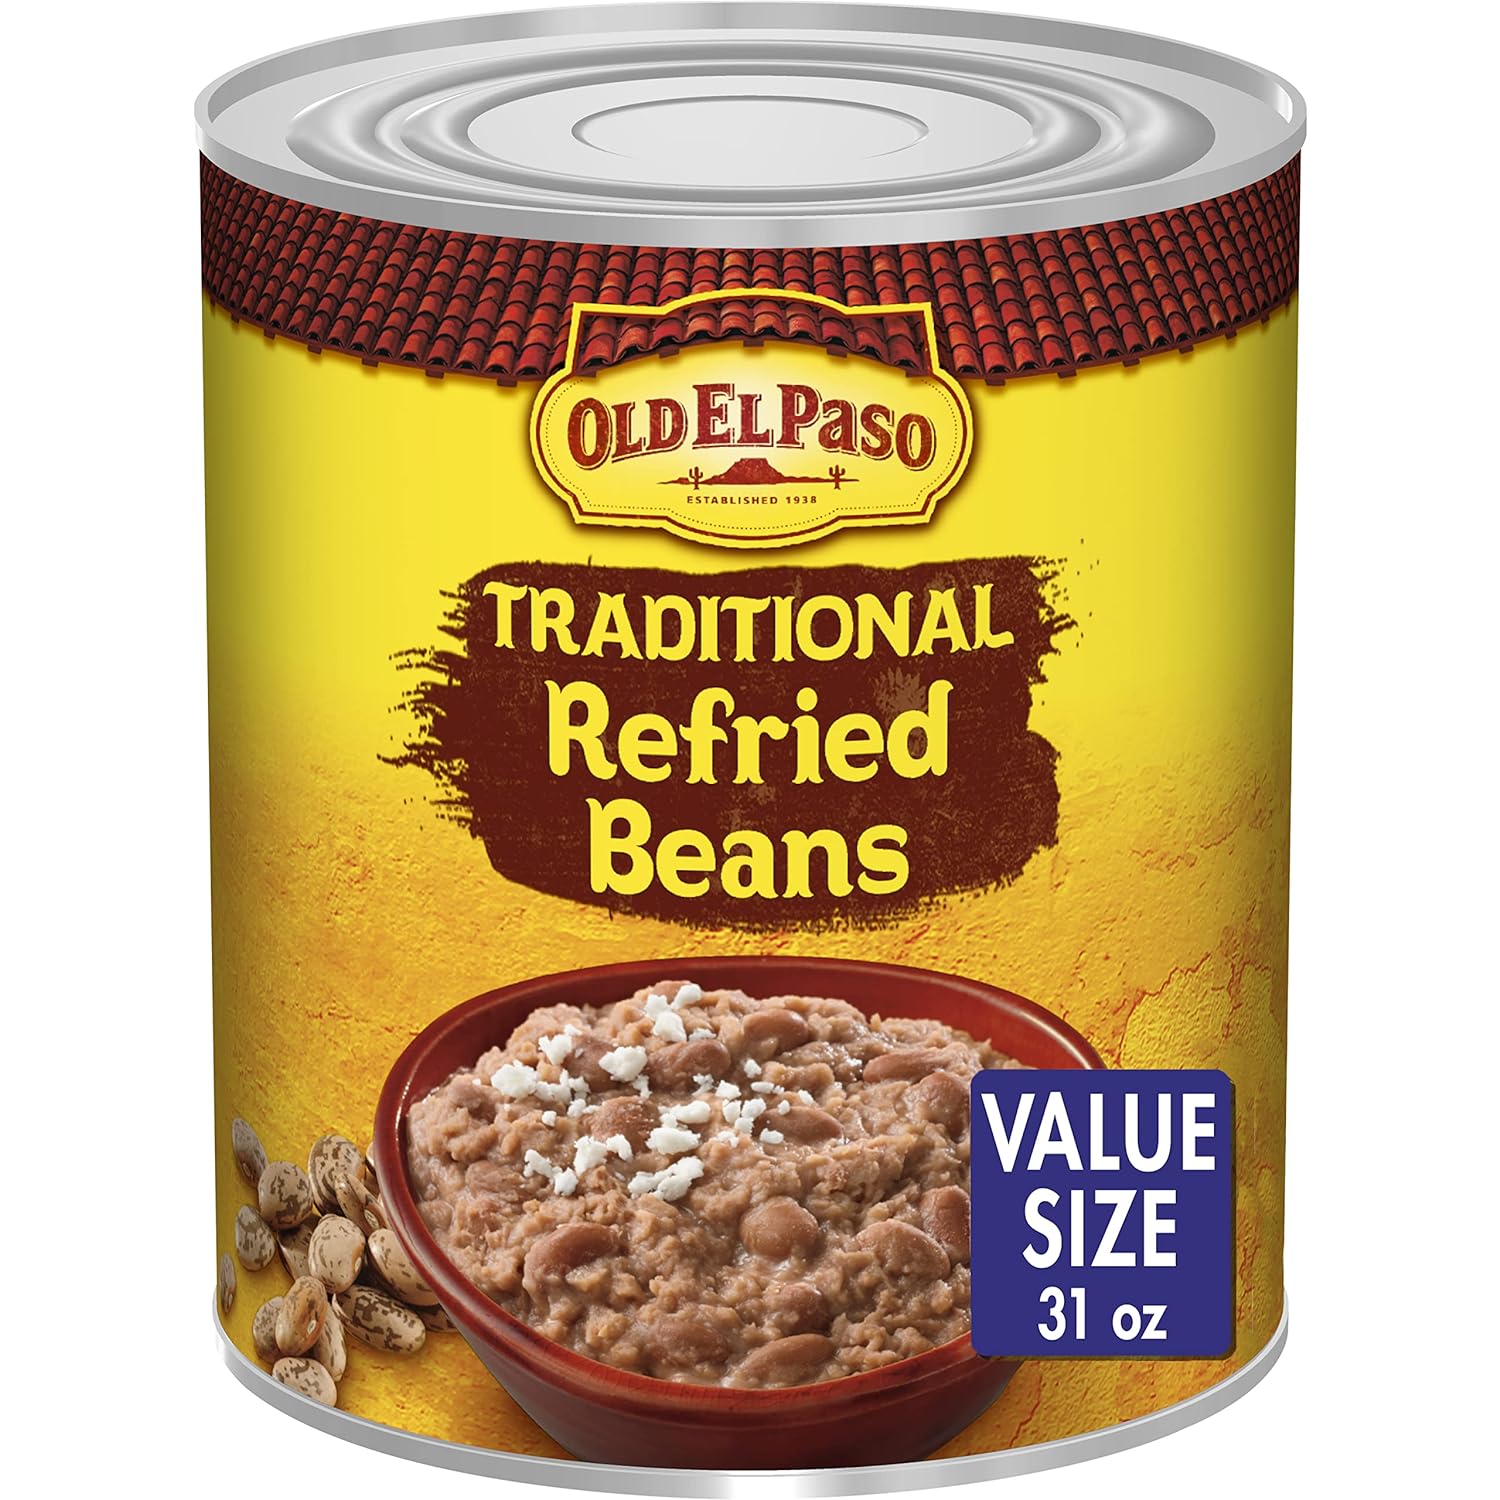 Old El Paso Traditional Refried Beans, Value Size, 31 oz